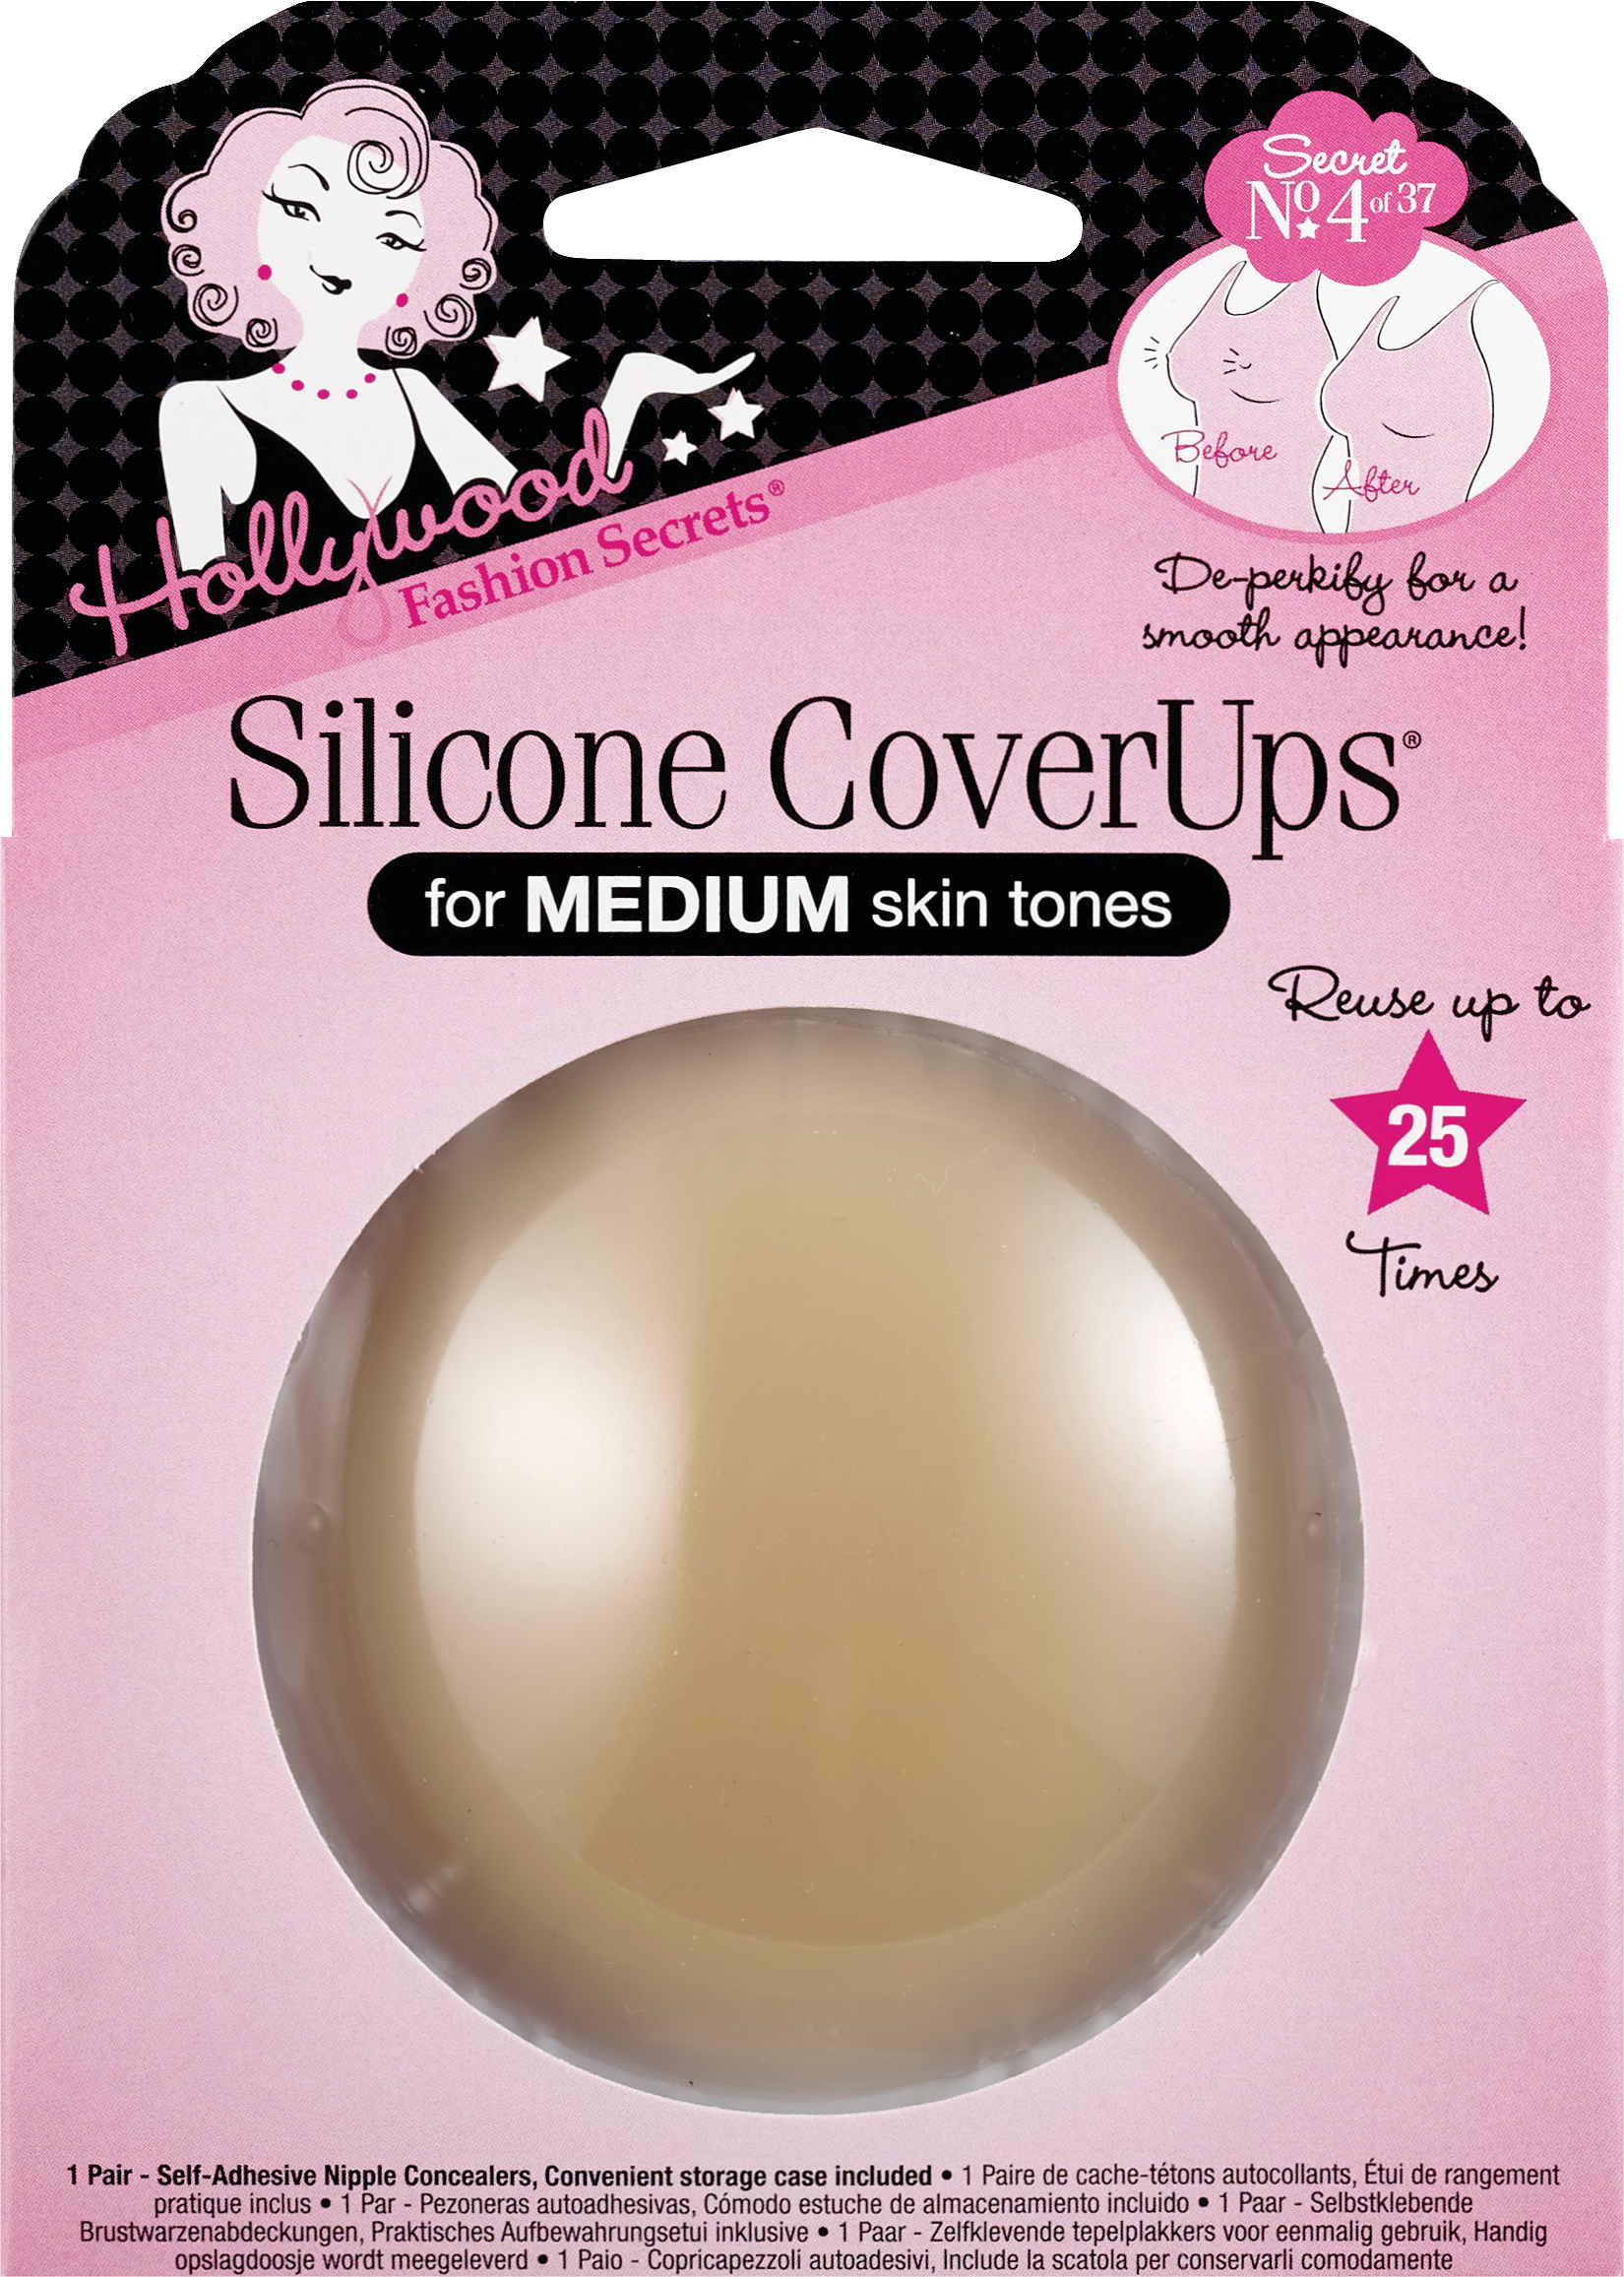 Hollywood - Silicone CoverUps